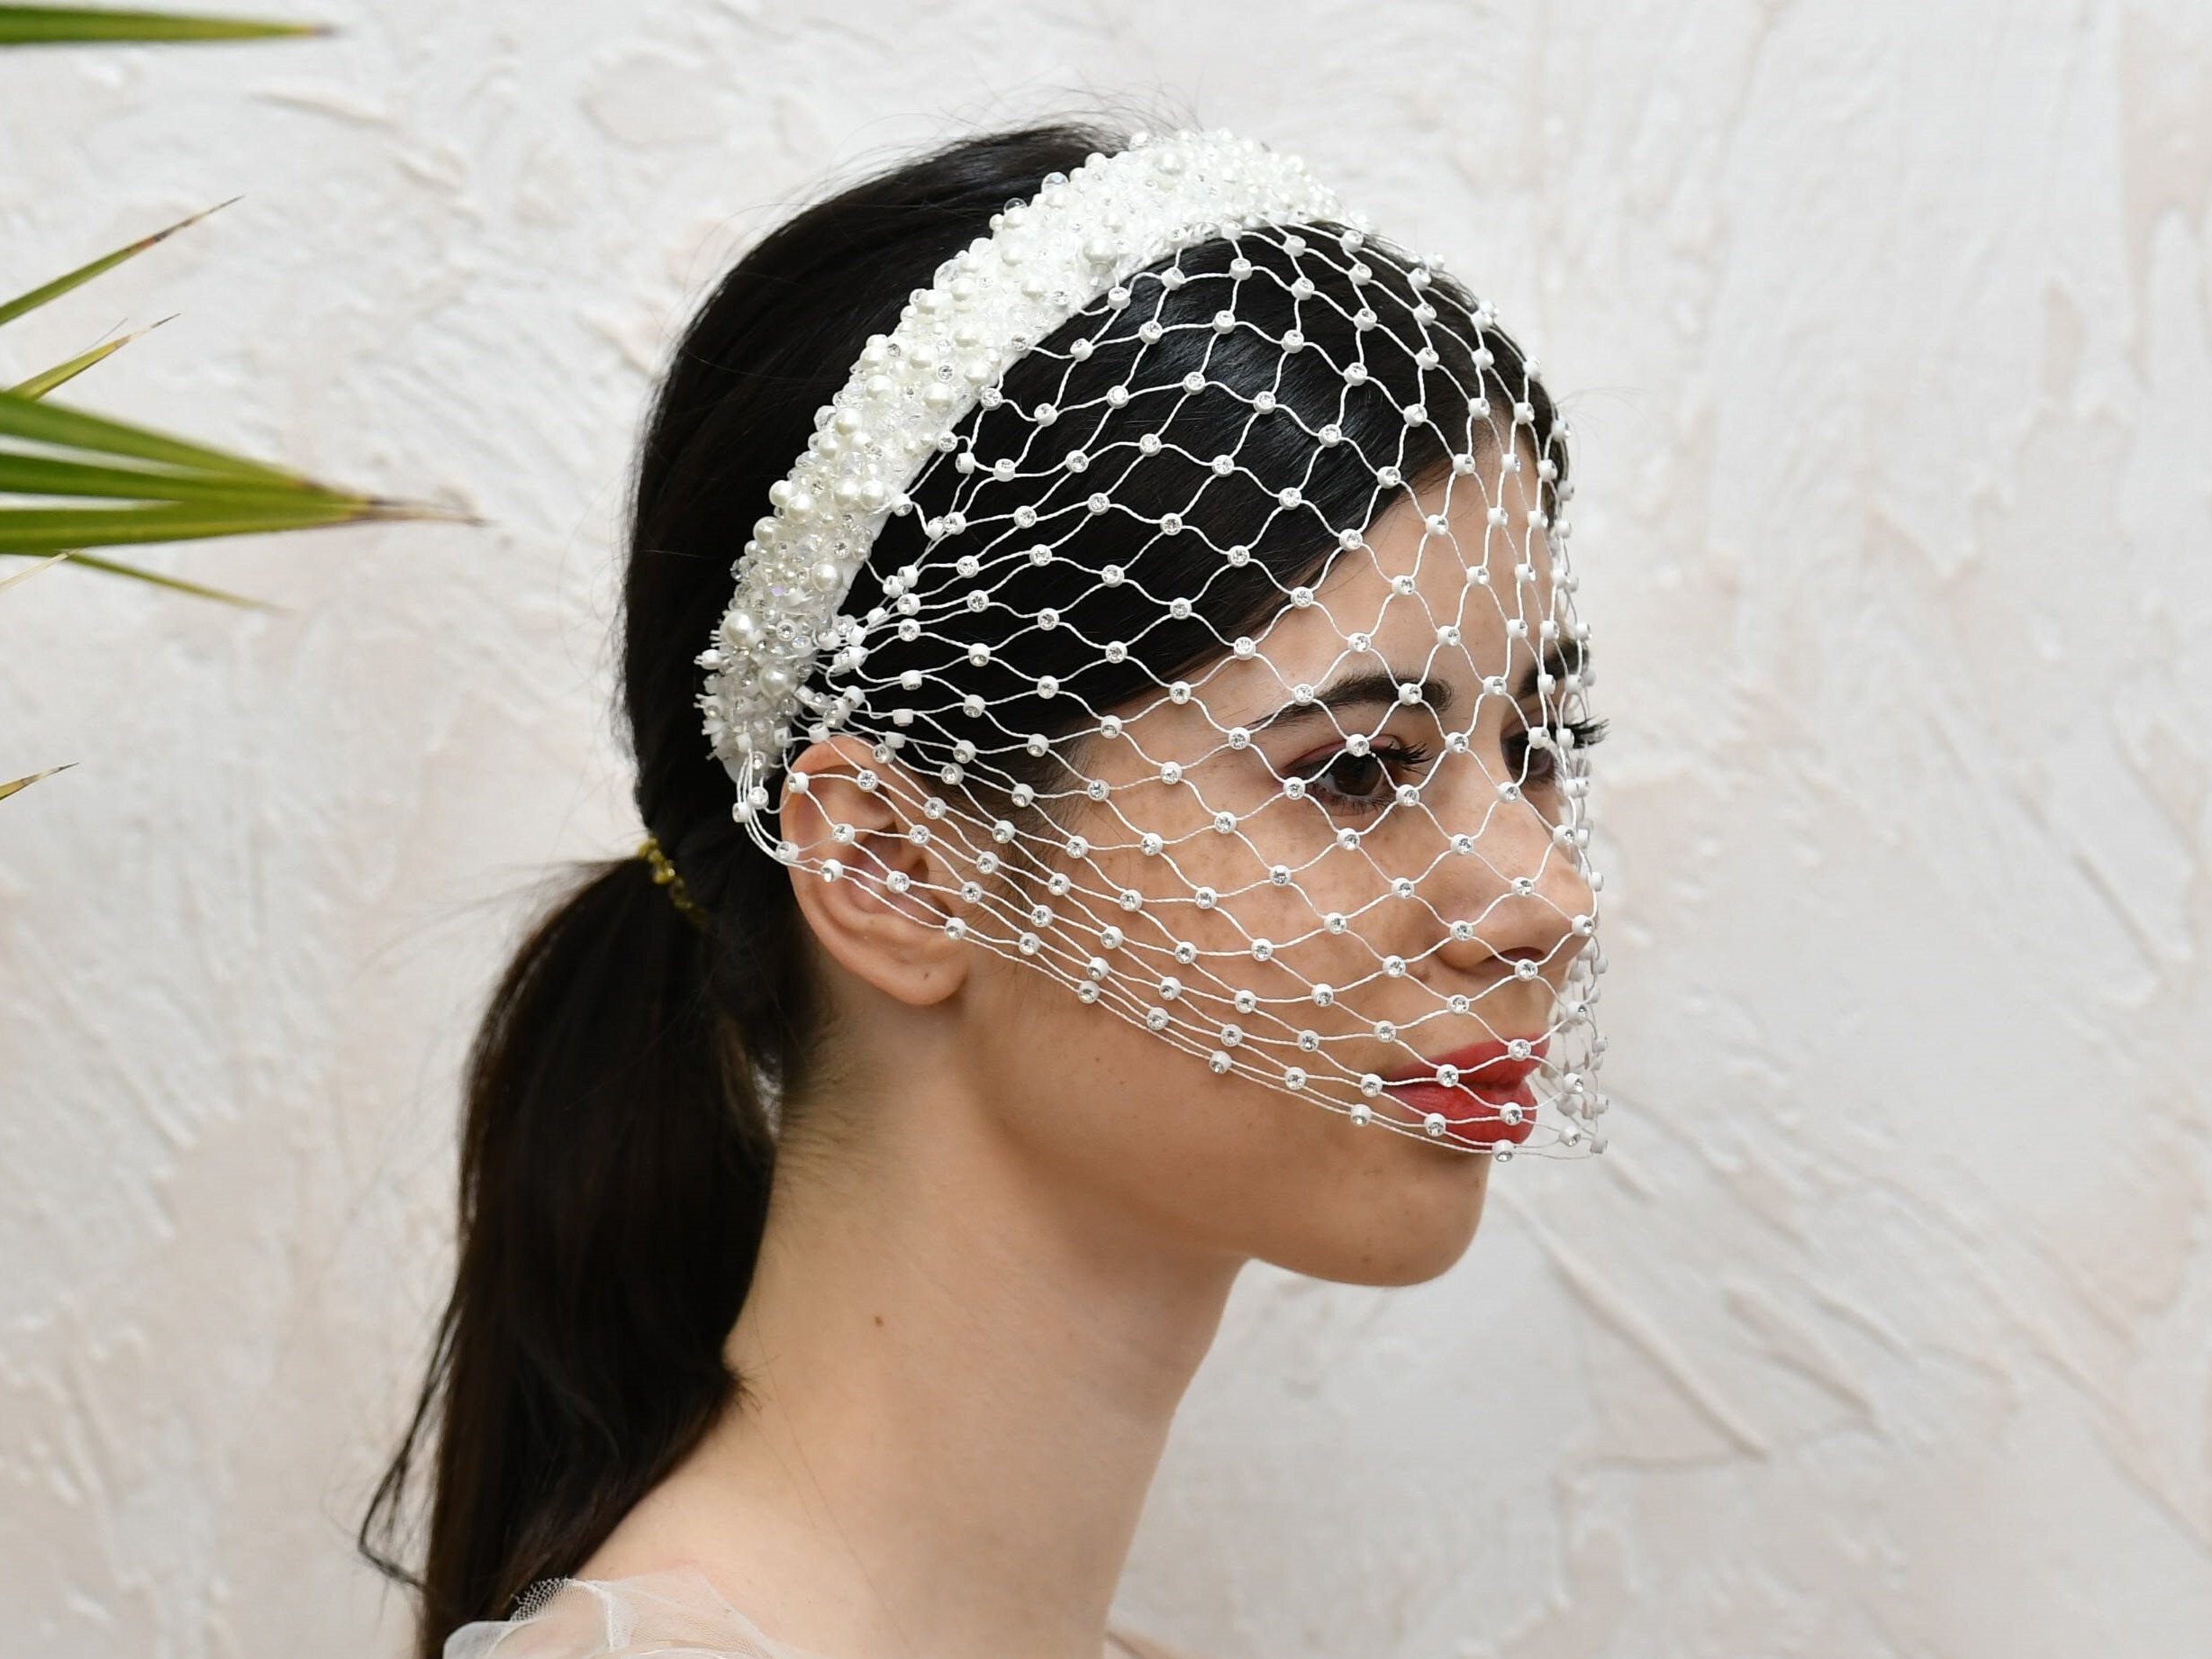 Stag & Hen - Alice Bride to Be Headband with Veil